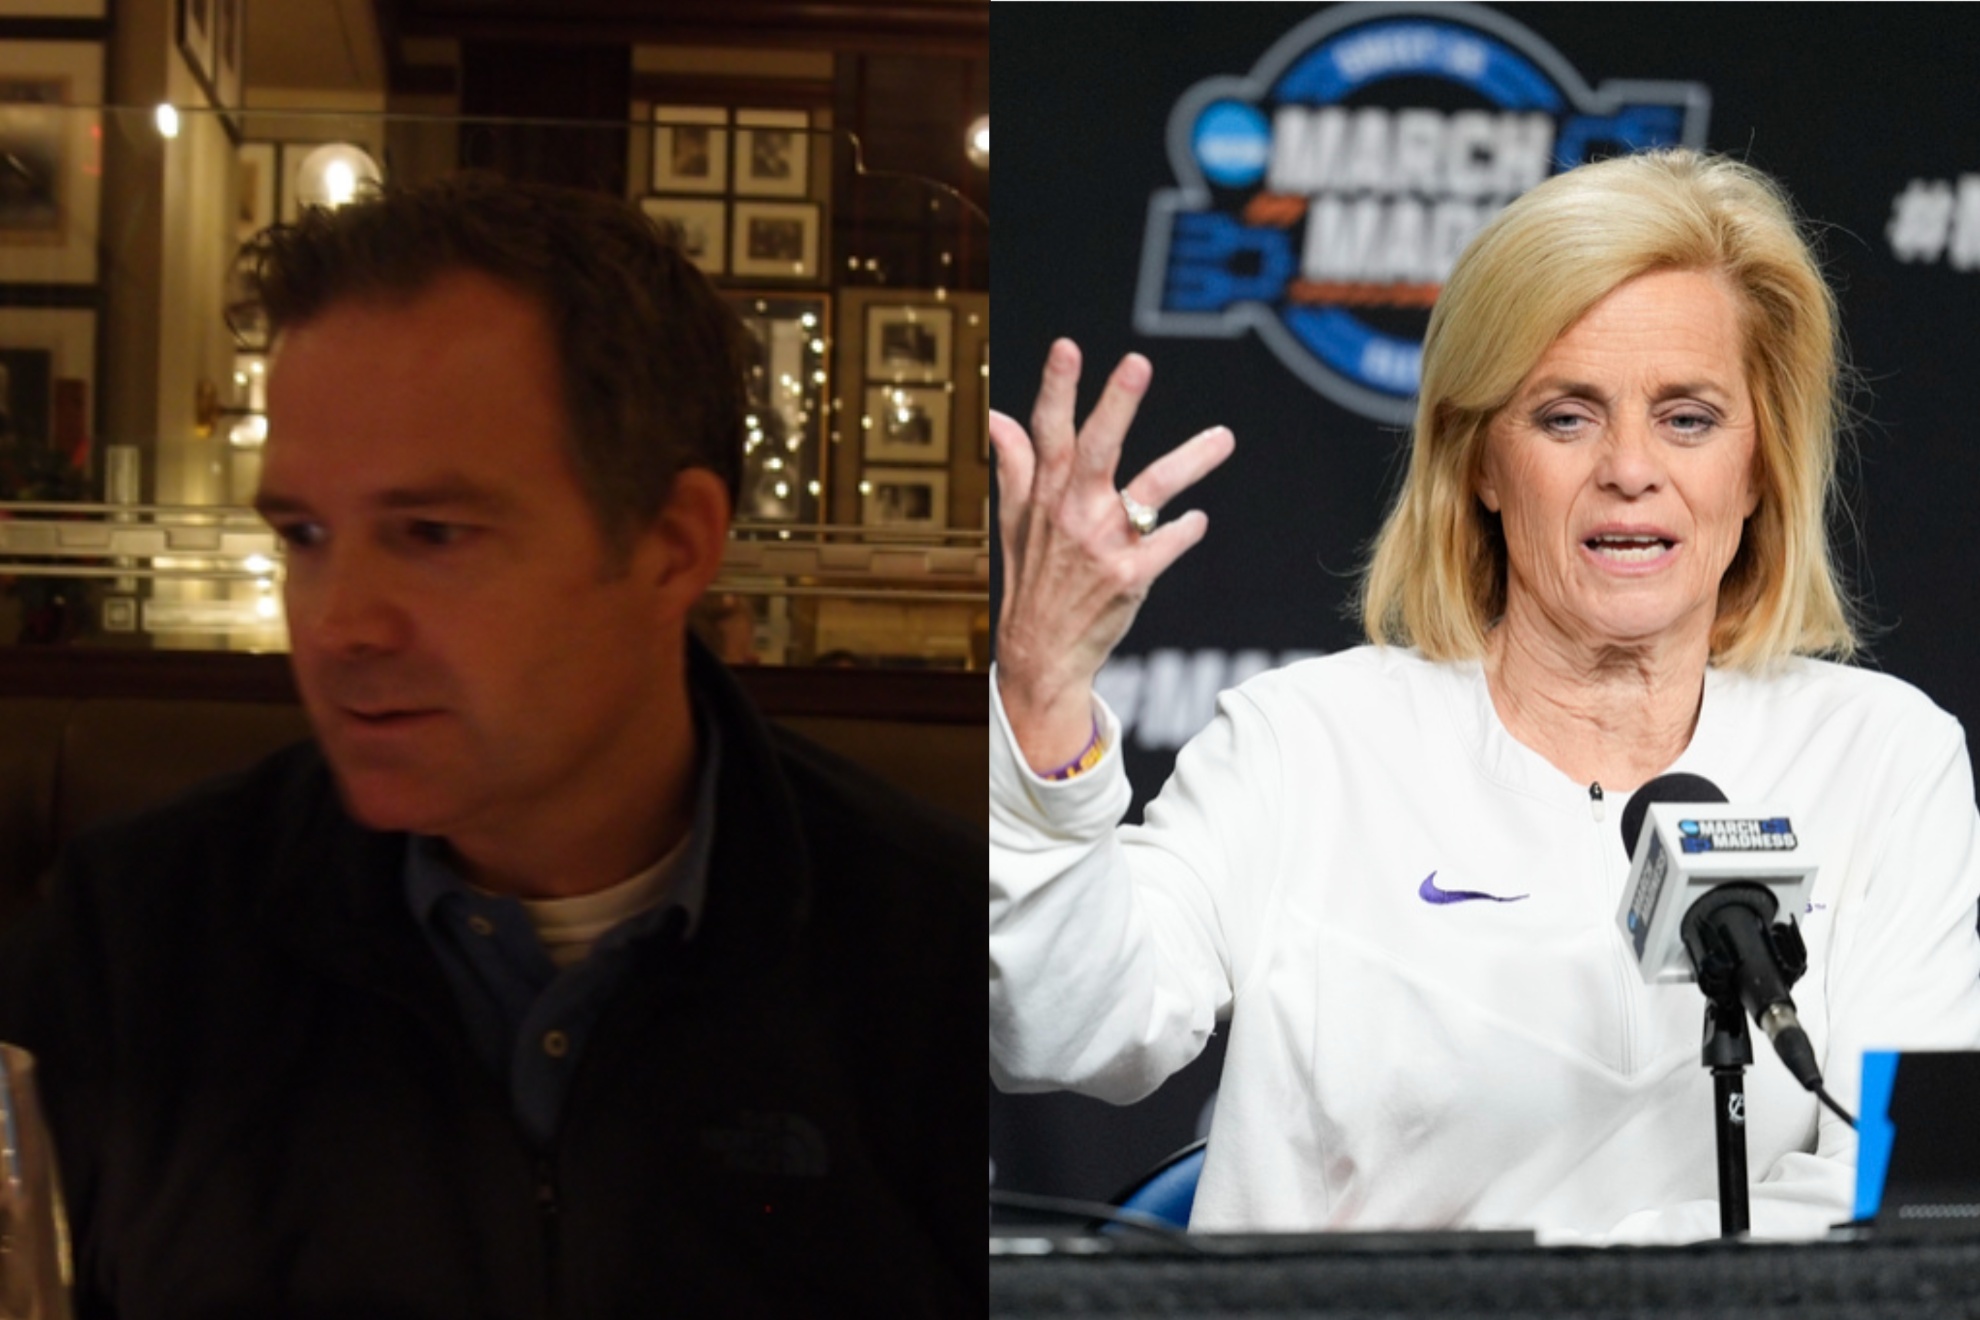 Ben Bolch (L) had to retract his column after criticism from Kim Mulkey.